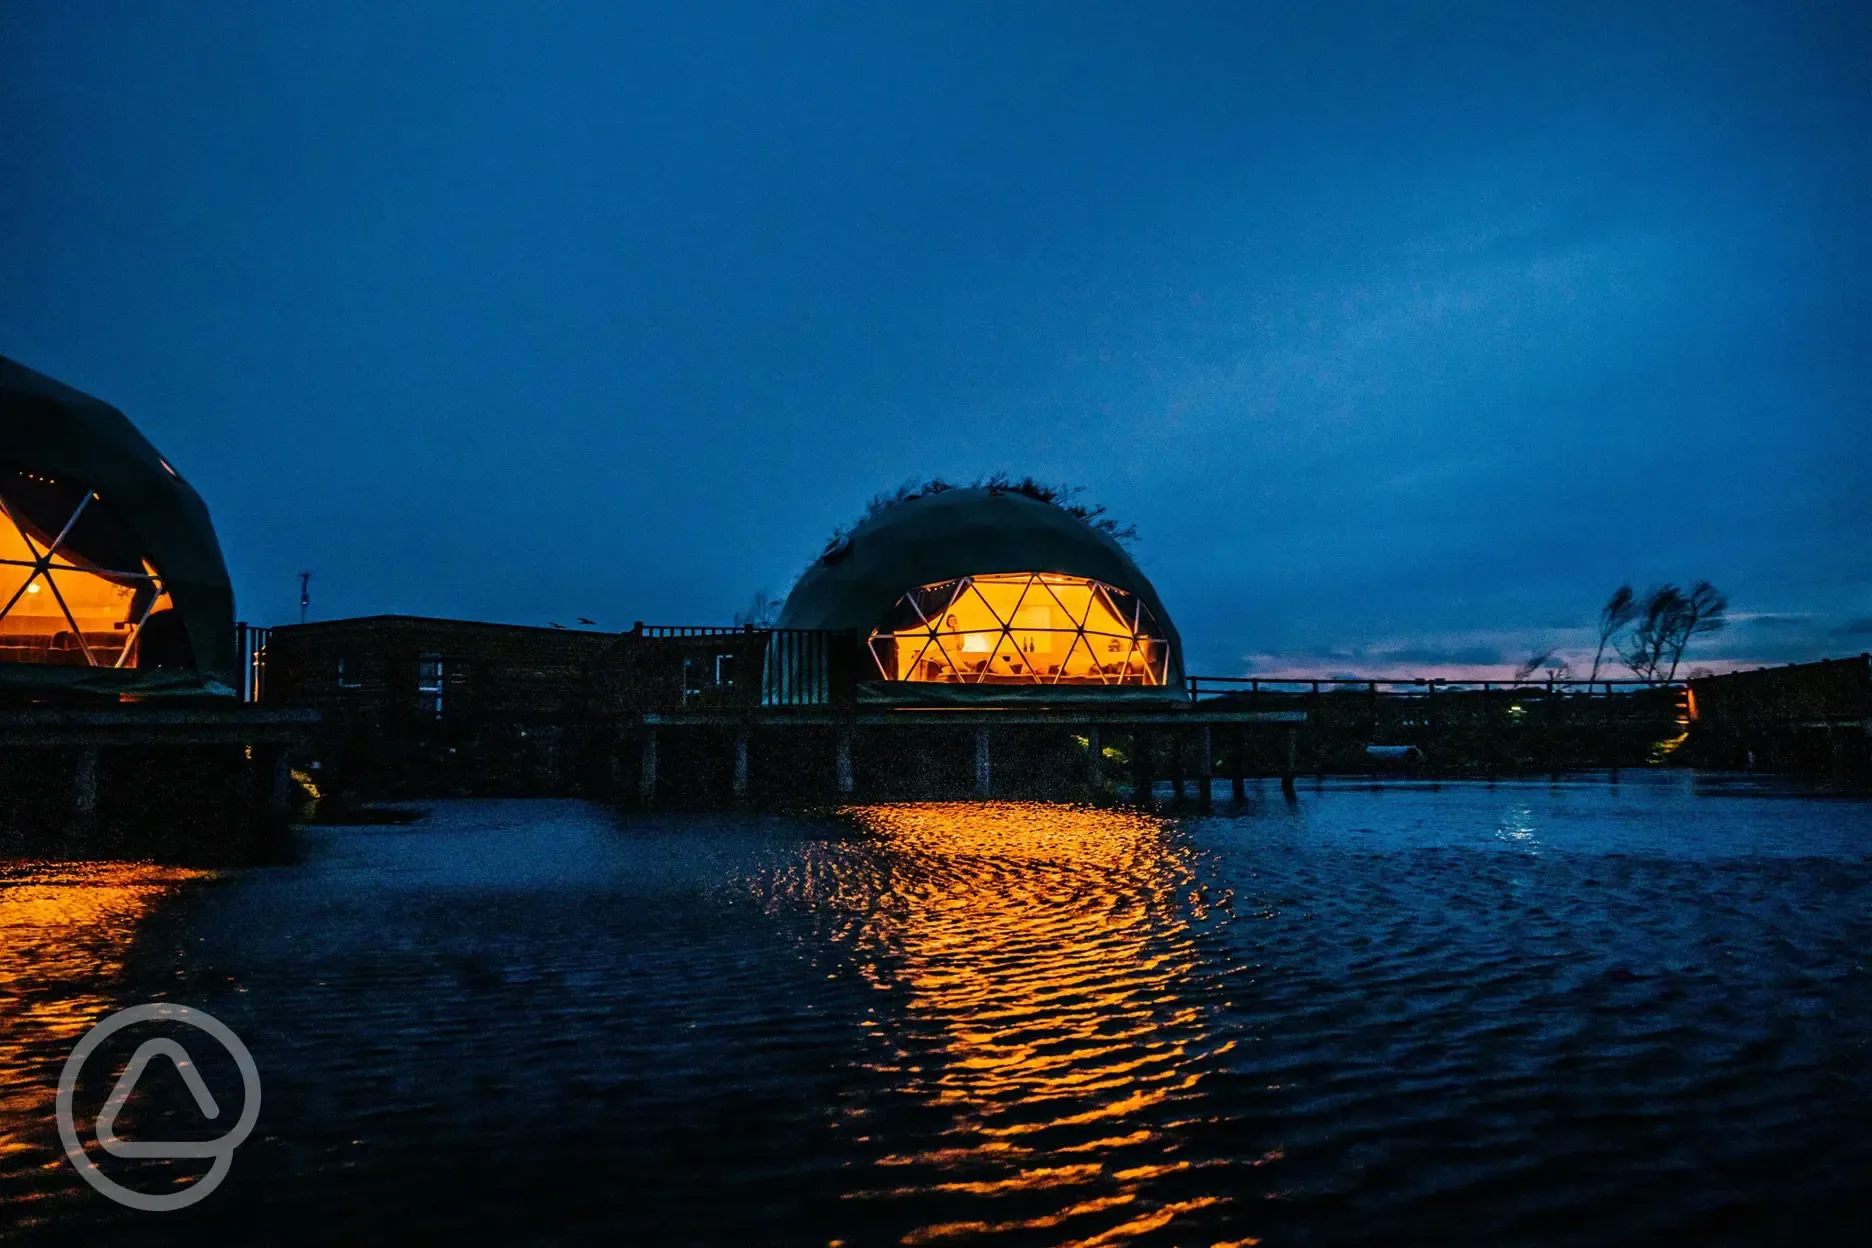 Geodesic Domes at night